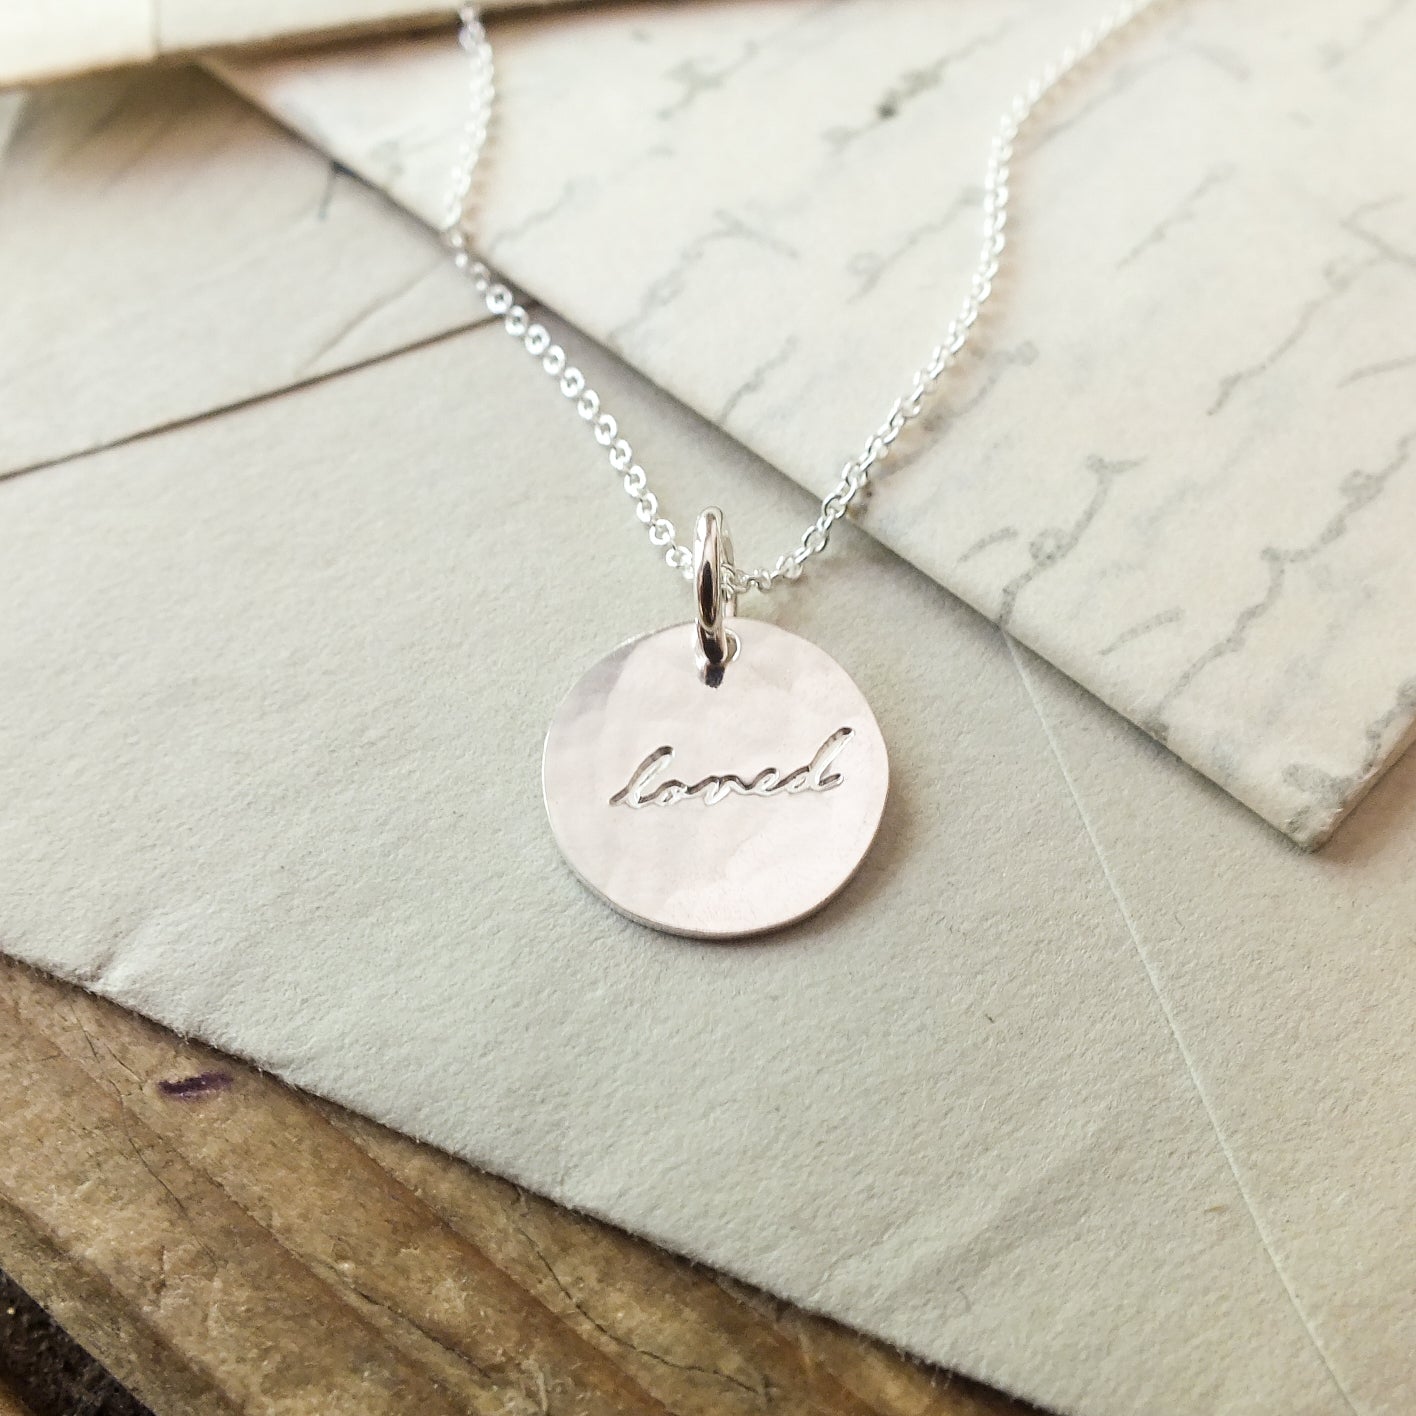 Becoming Jewelry's Loved Necklace with the word 